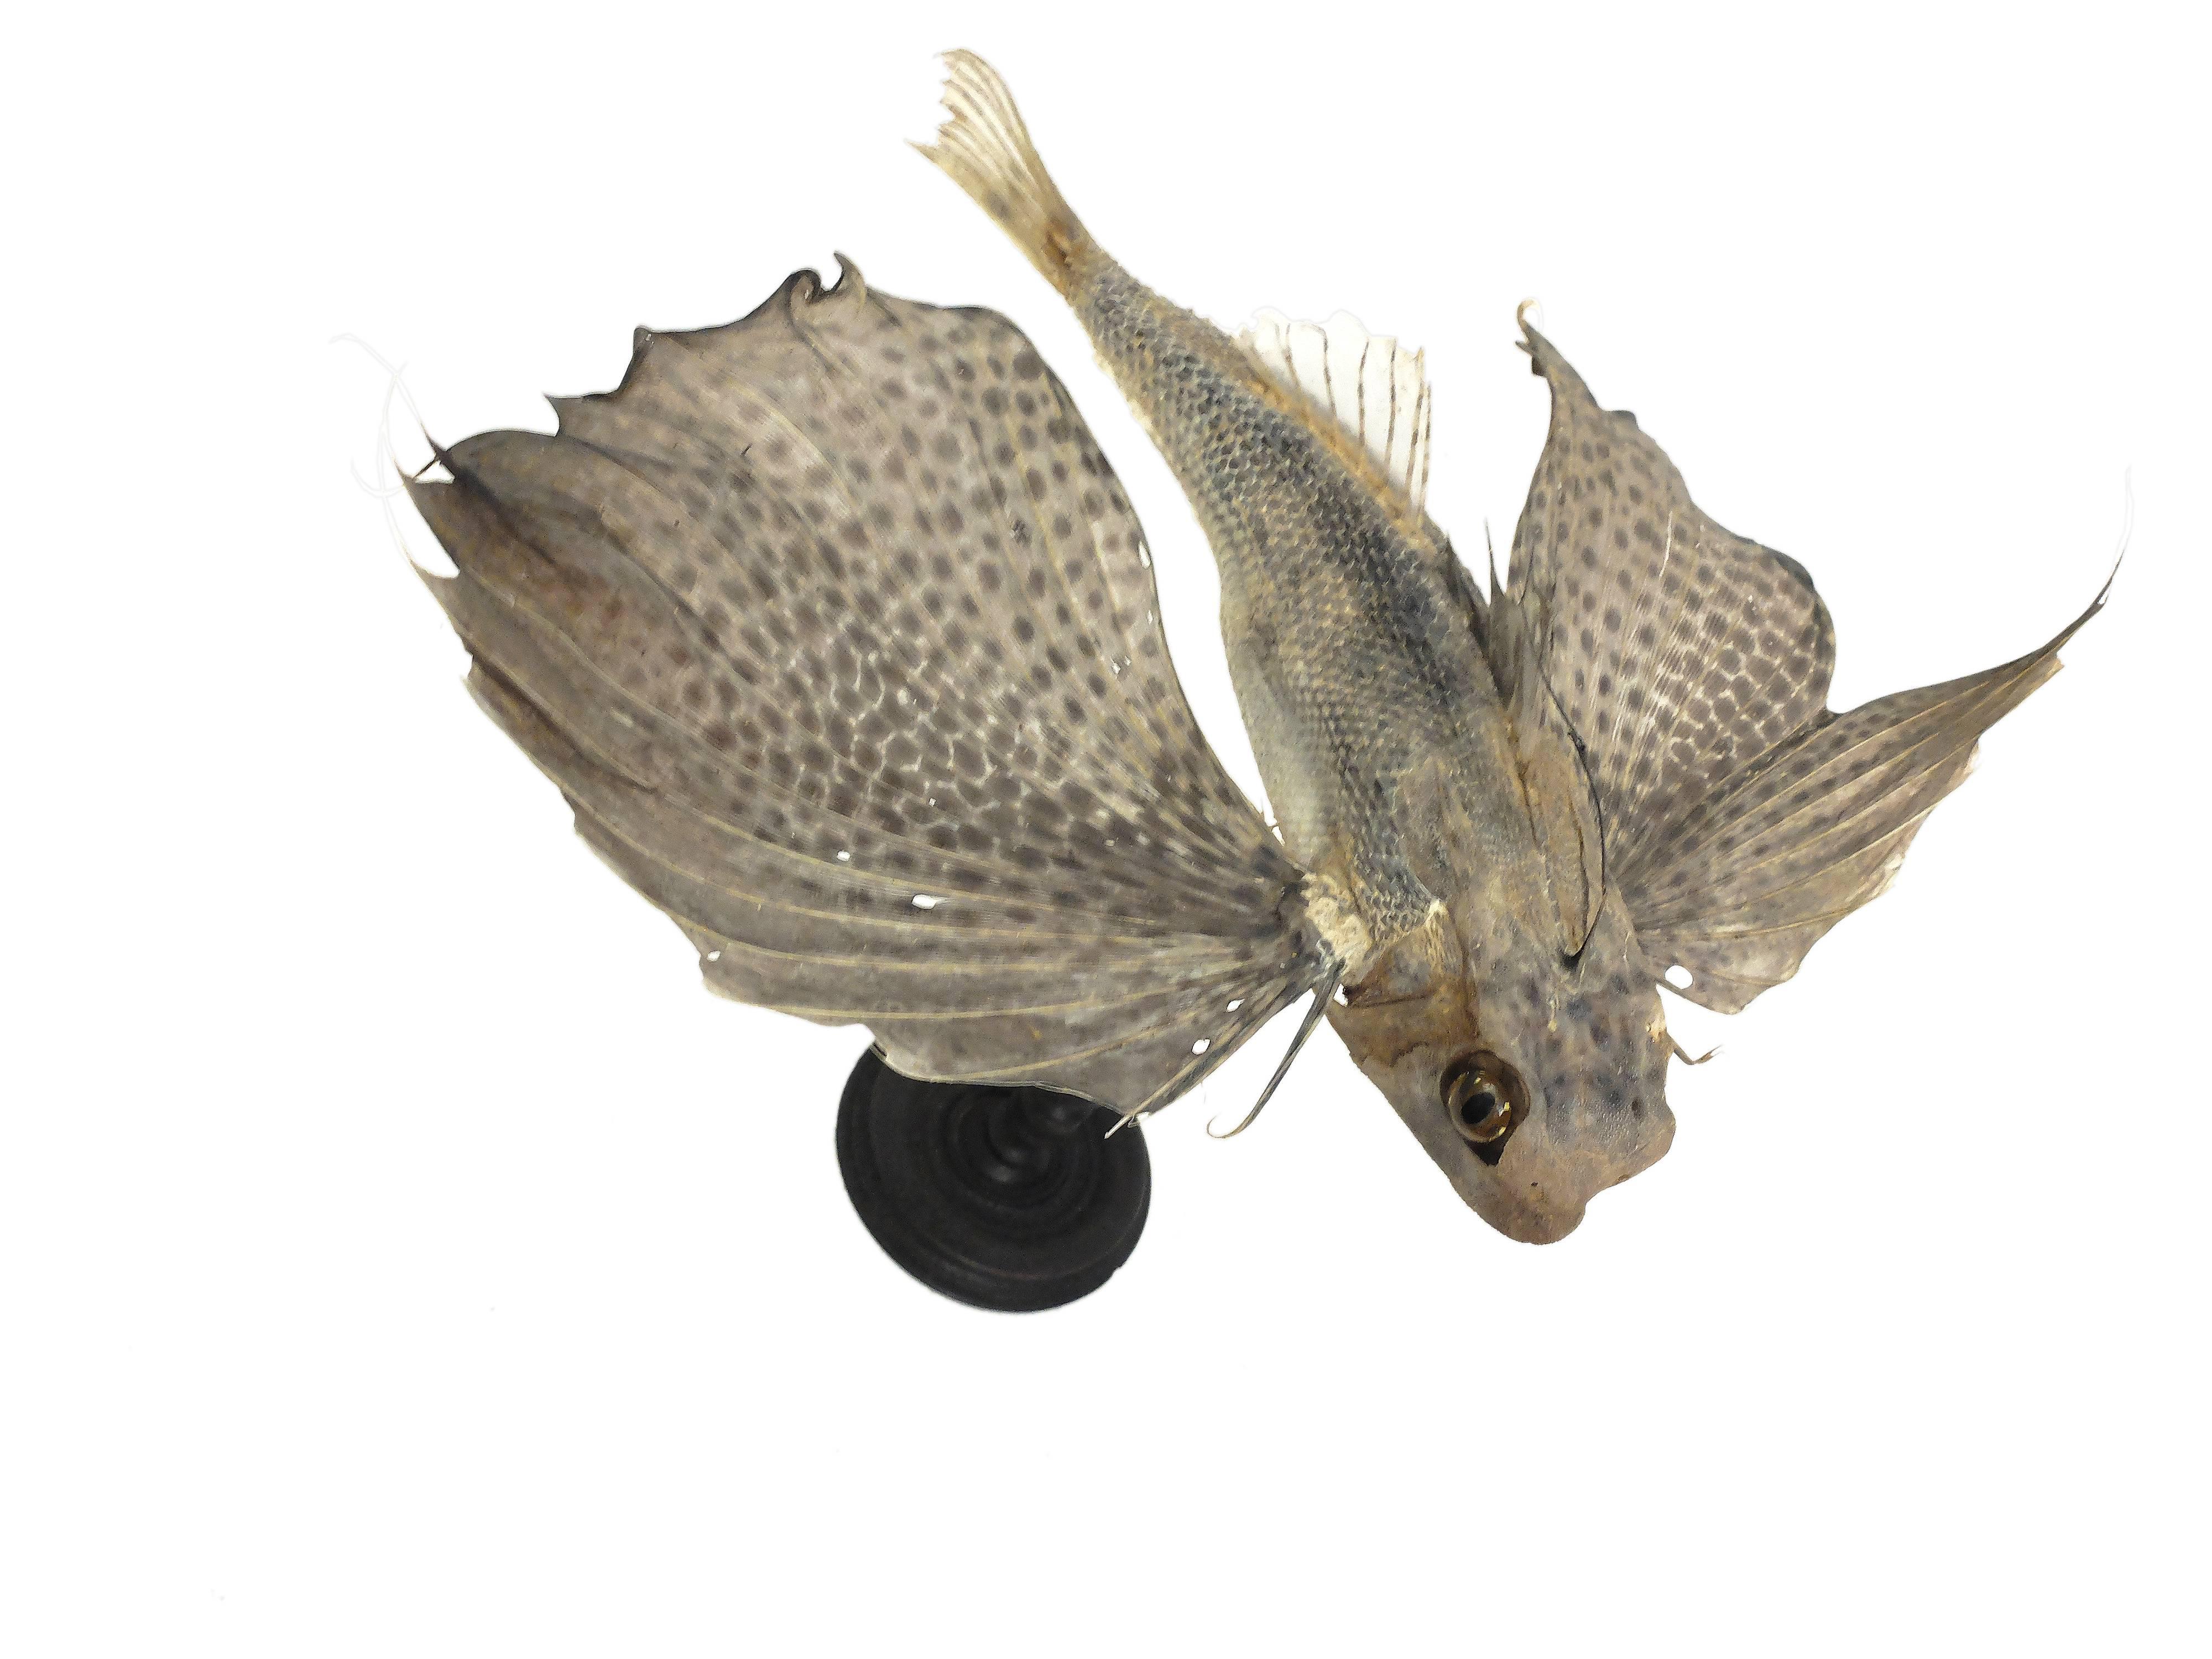 A rare marine natural Wunderkammer specimen, the flying fish, Exocoetus Volitans. The specimen is stuffed and mounted over a black wooden base. Italy, circa 1880.